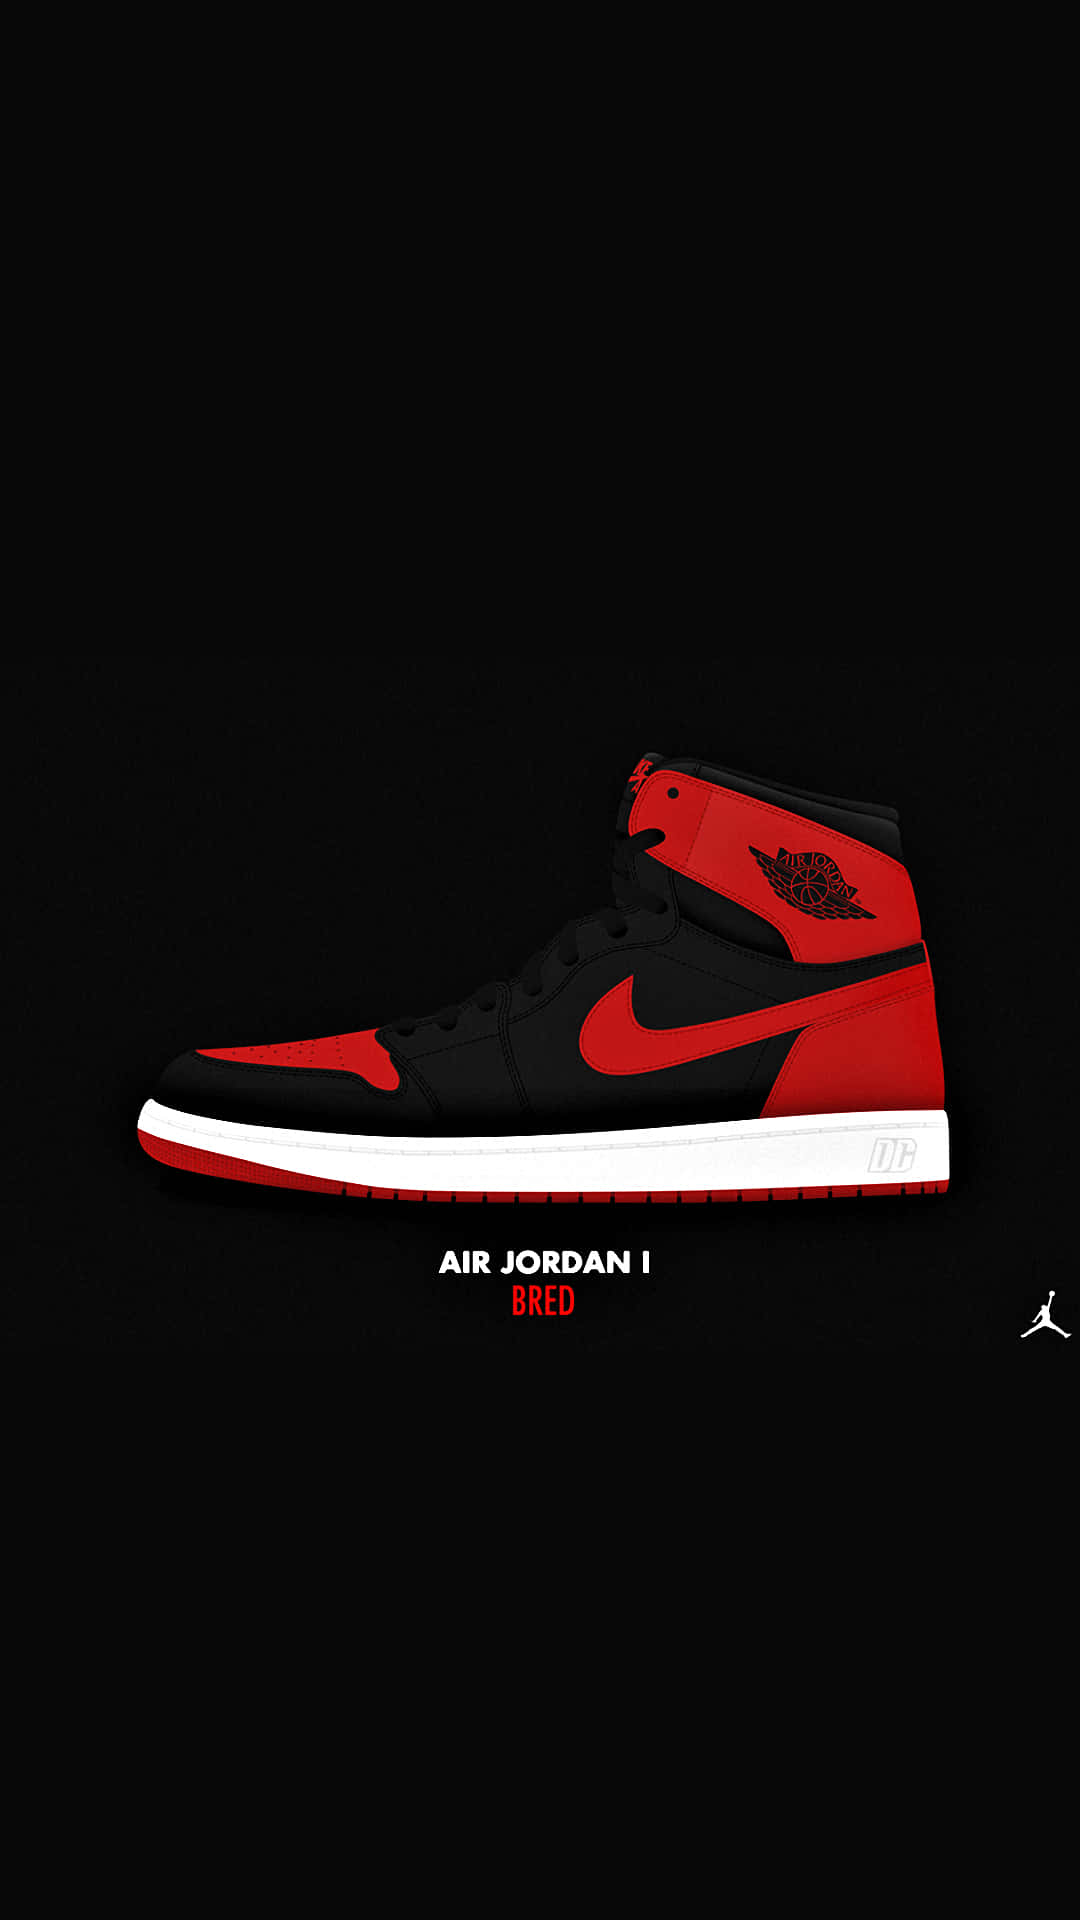 Show your style with these statement red Jordan shoes. Wallpaper